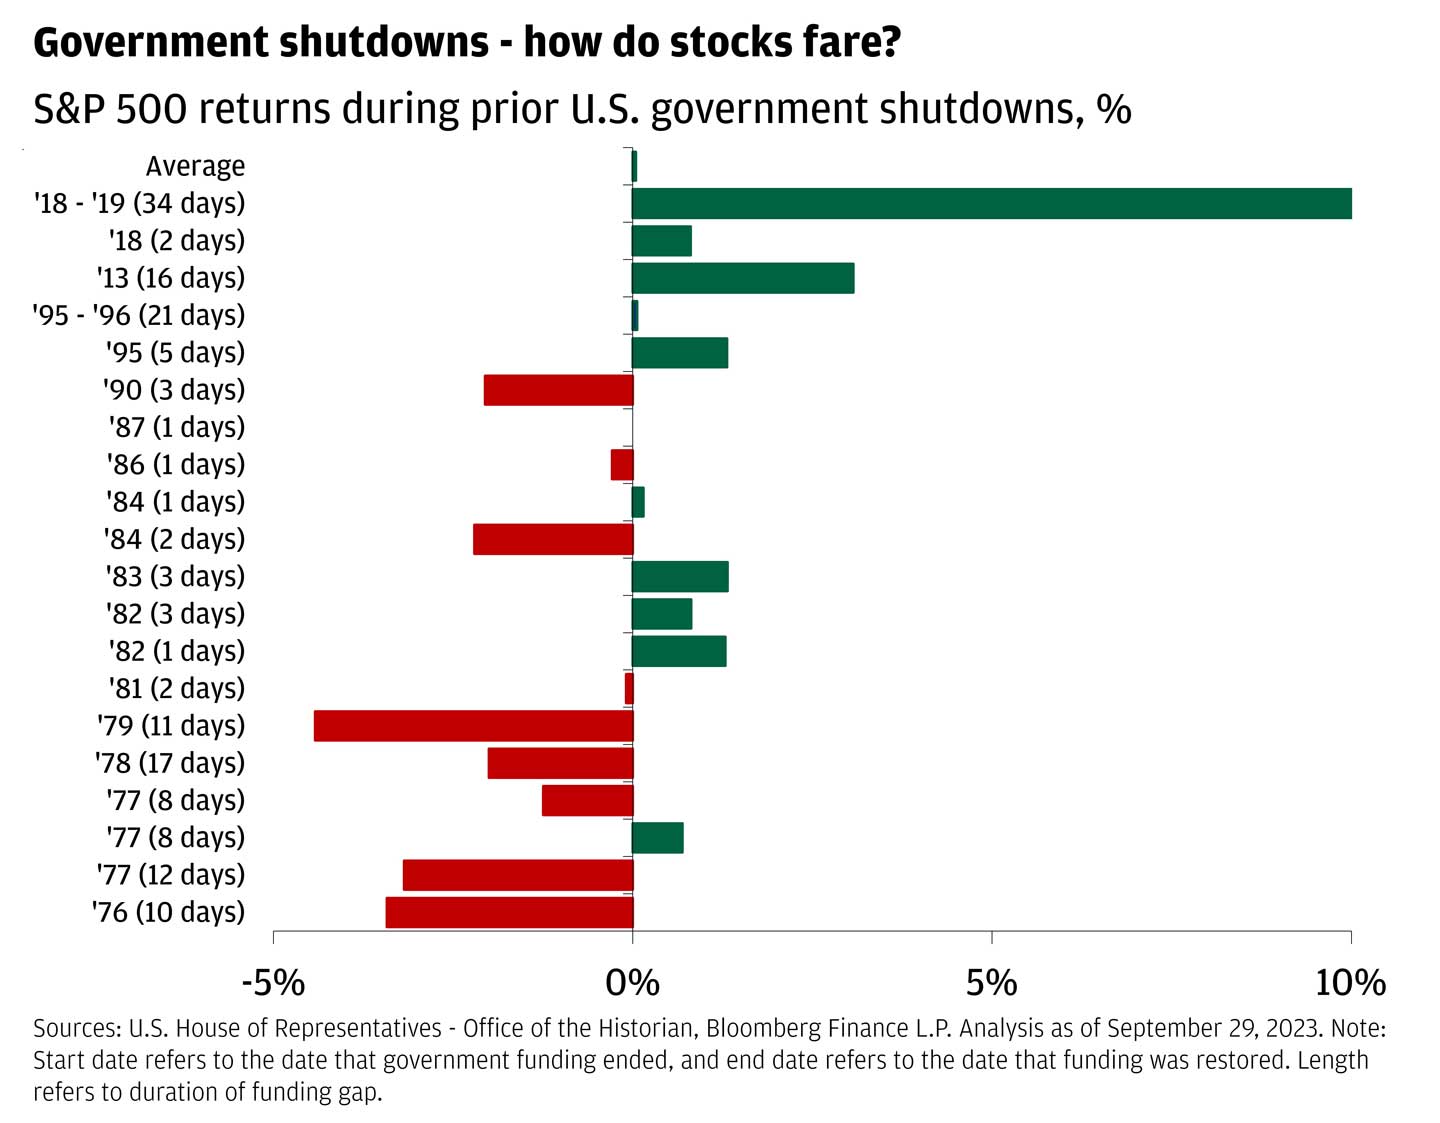 This bar graph describes S&P 500 returns during prior U.S. government shutdowns, percentage